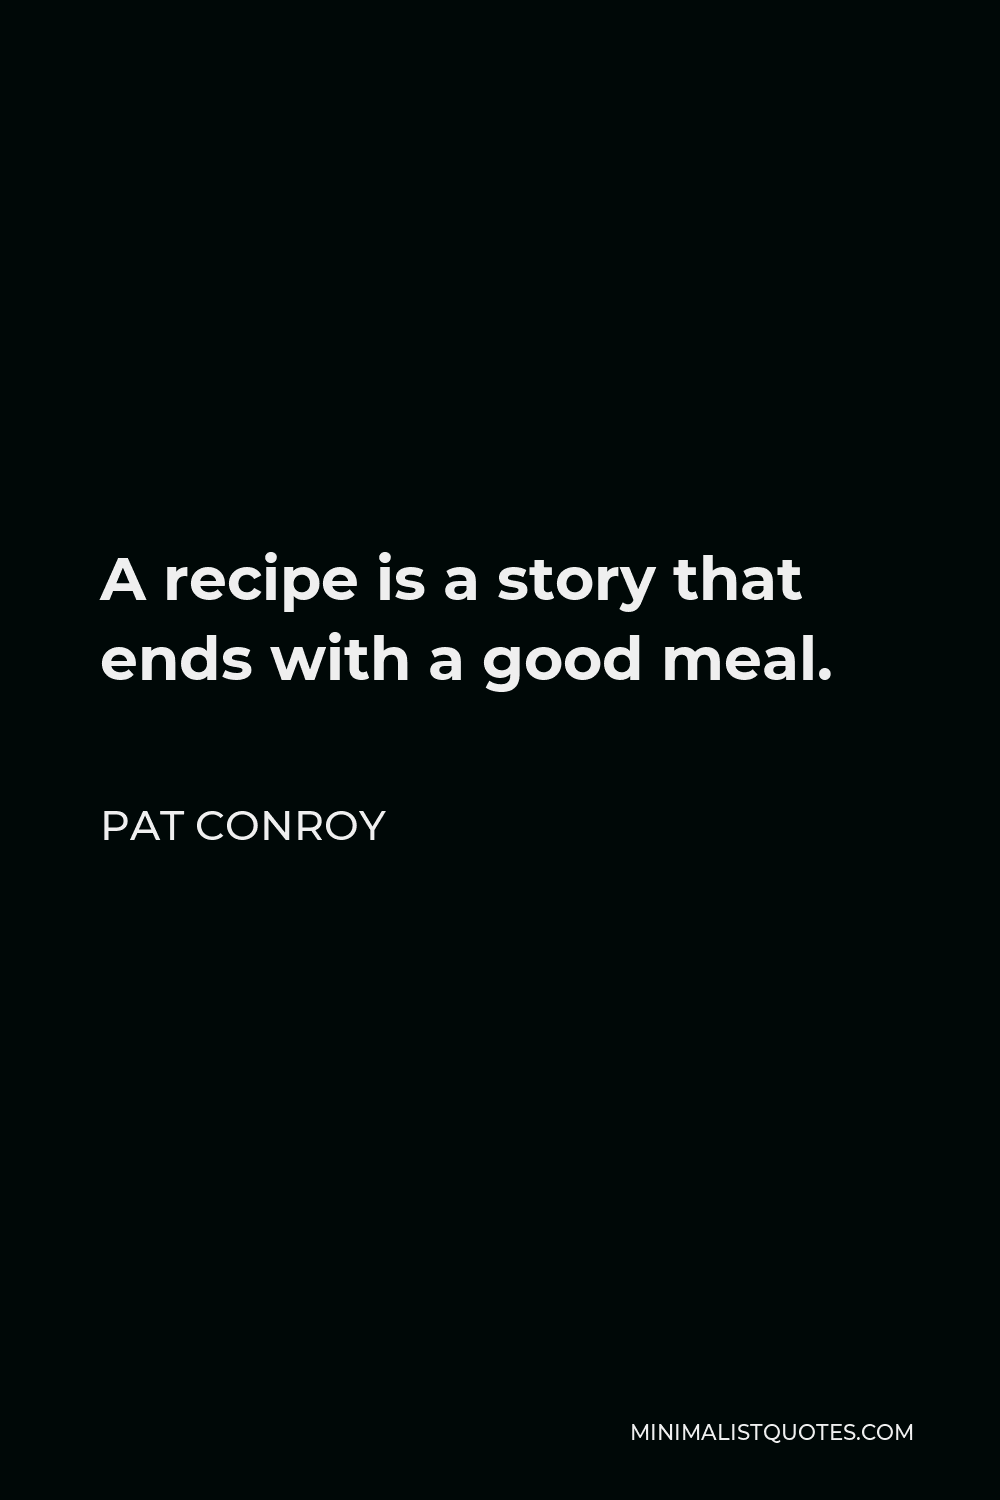 Pat Conroy Quote - A recipe is a story that ends with a good meal.